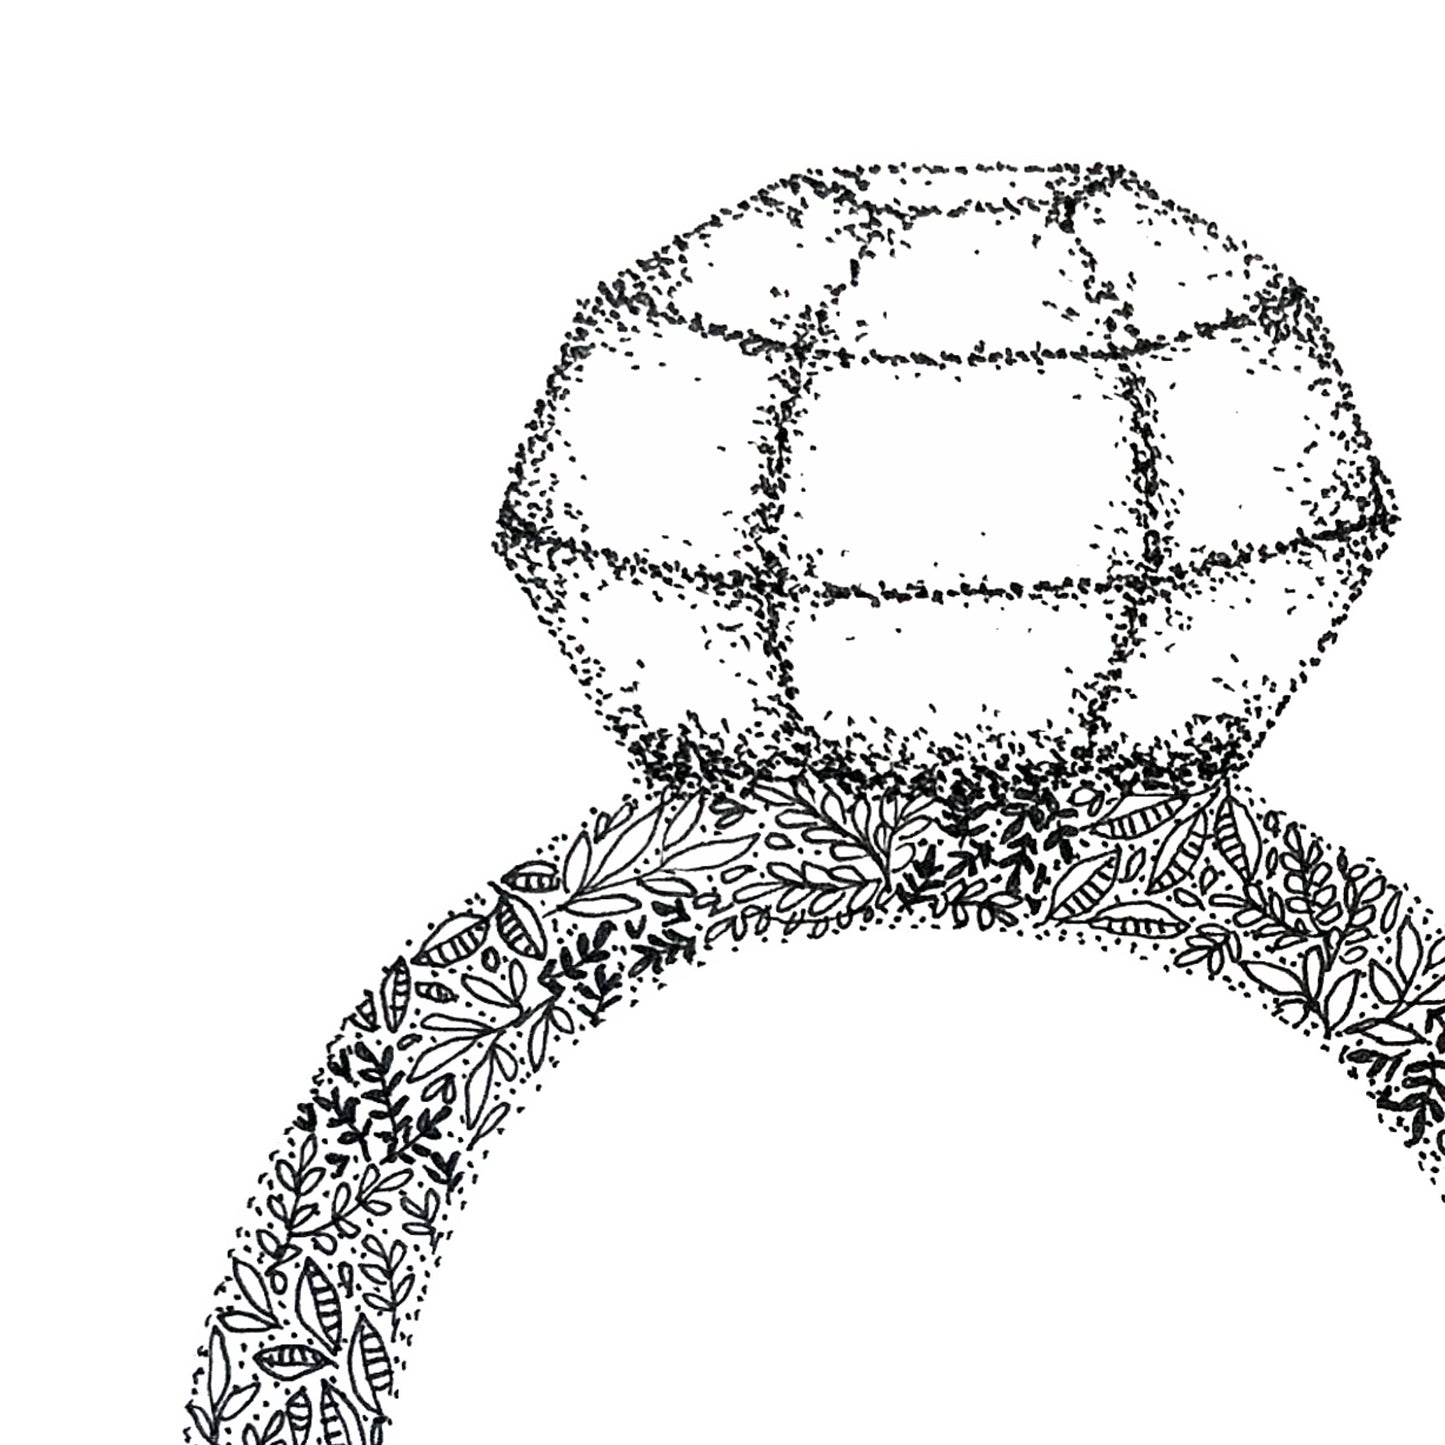 Image shows close up of the diamond from a diamond ring illustration. Image is made from black and white floral drawings and different sized dots. image is laid on a plain white background.